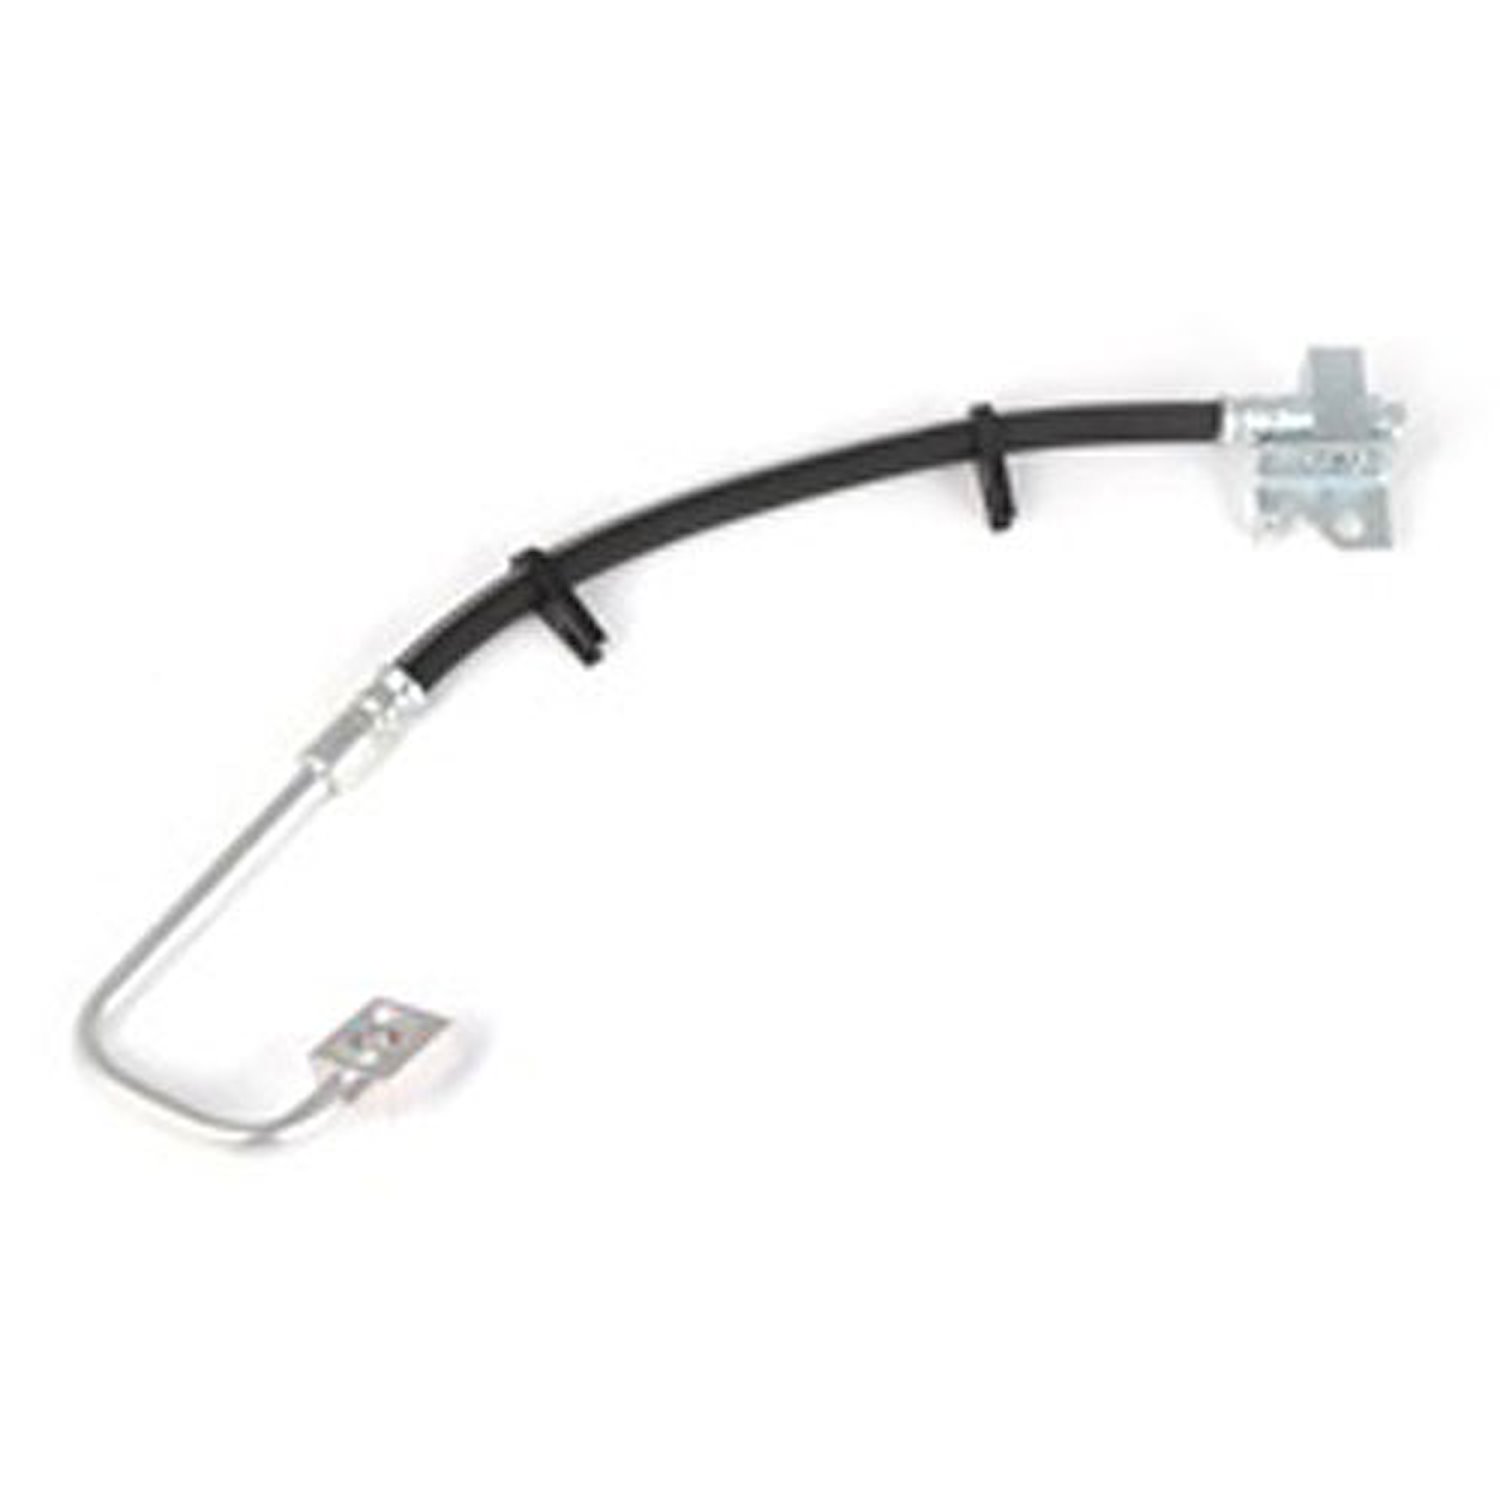 This right rear brake hose fits 06-09 Jeep